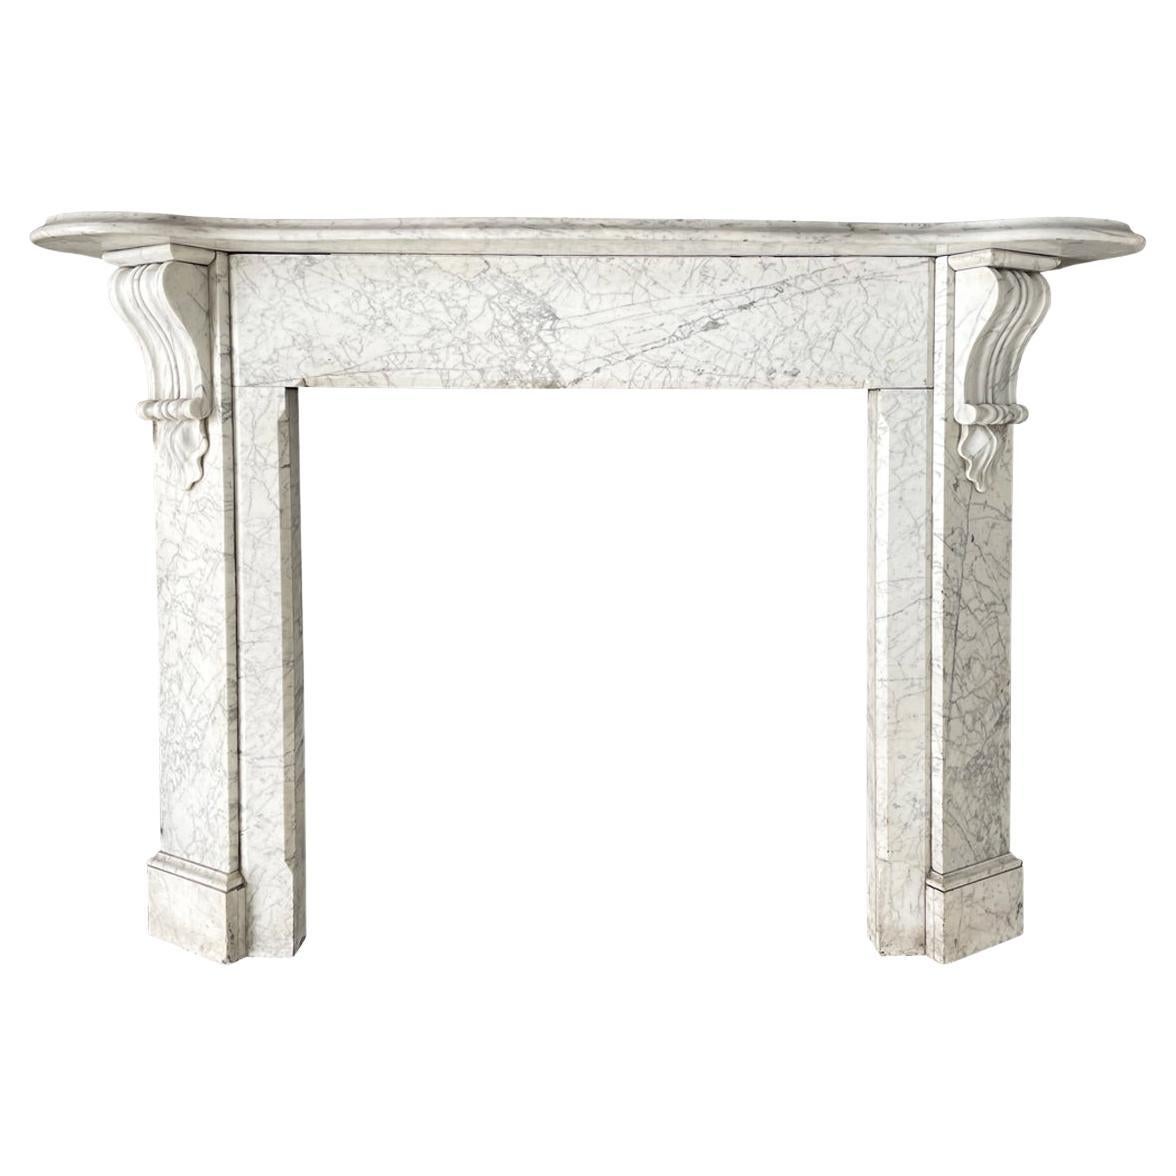 Corbelled Victorian Carrara Marble Fireplace Surround